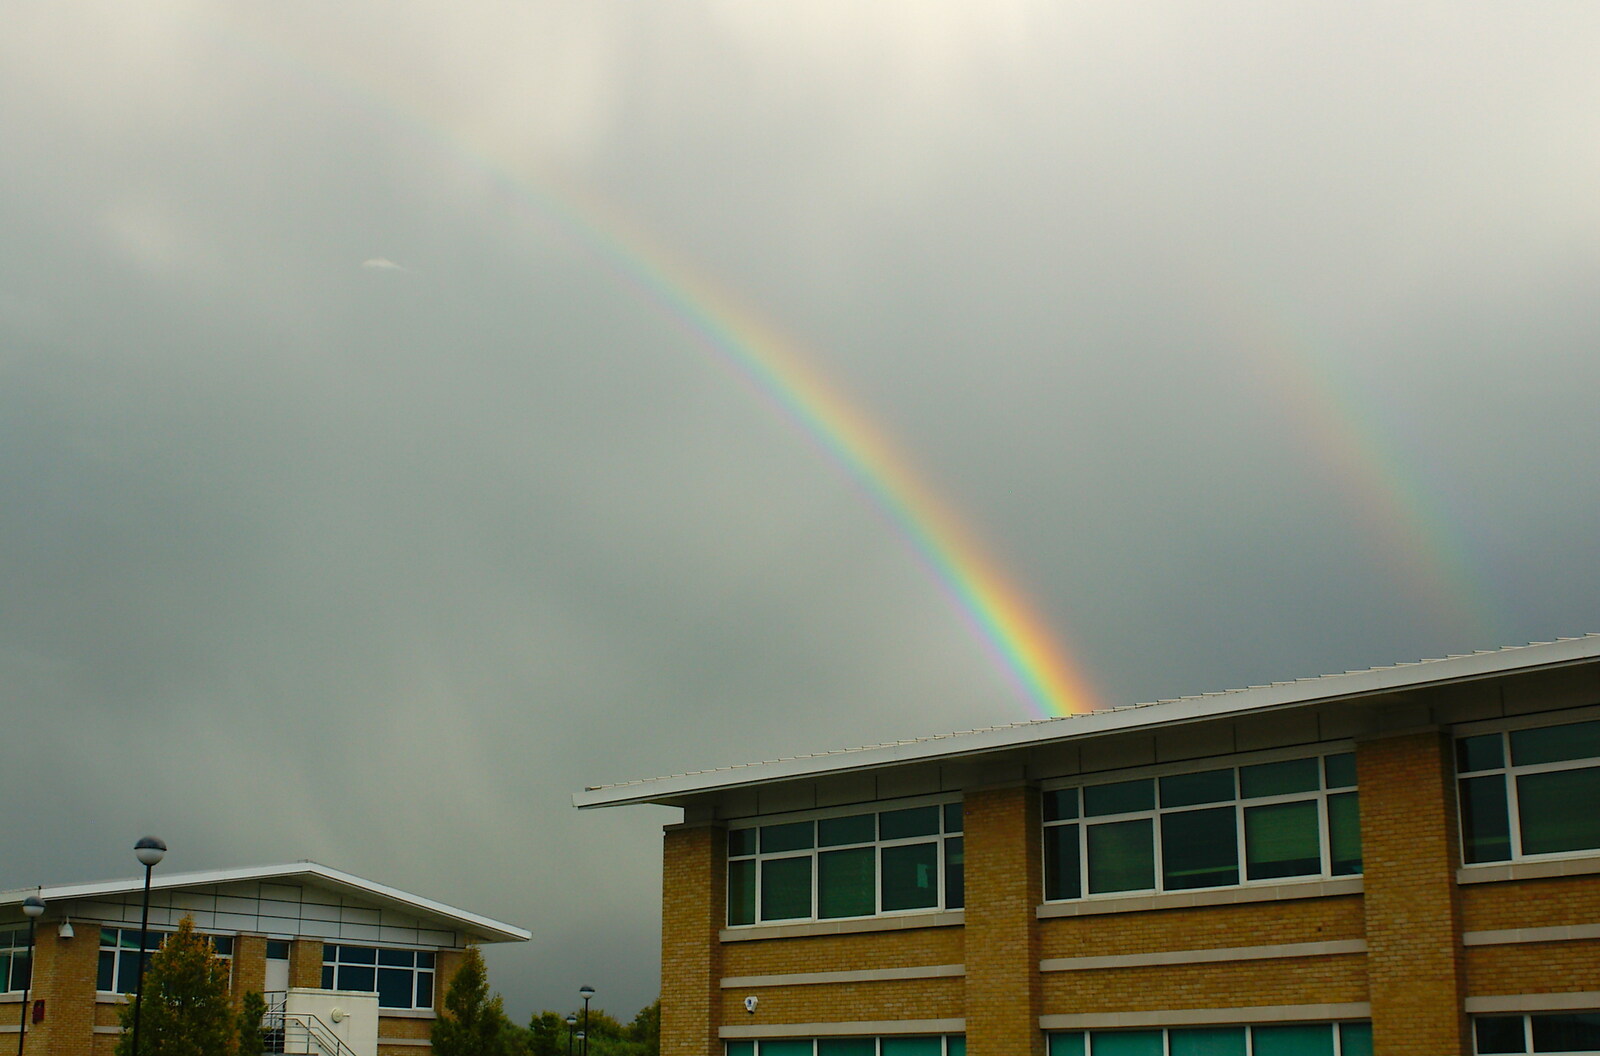 There's a double spoked rainbow over Matrix House from Andrew Leaves Qualcomm, Cambridge - 18th October 2005